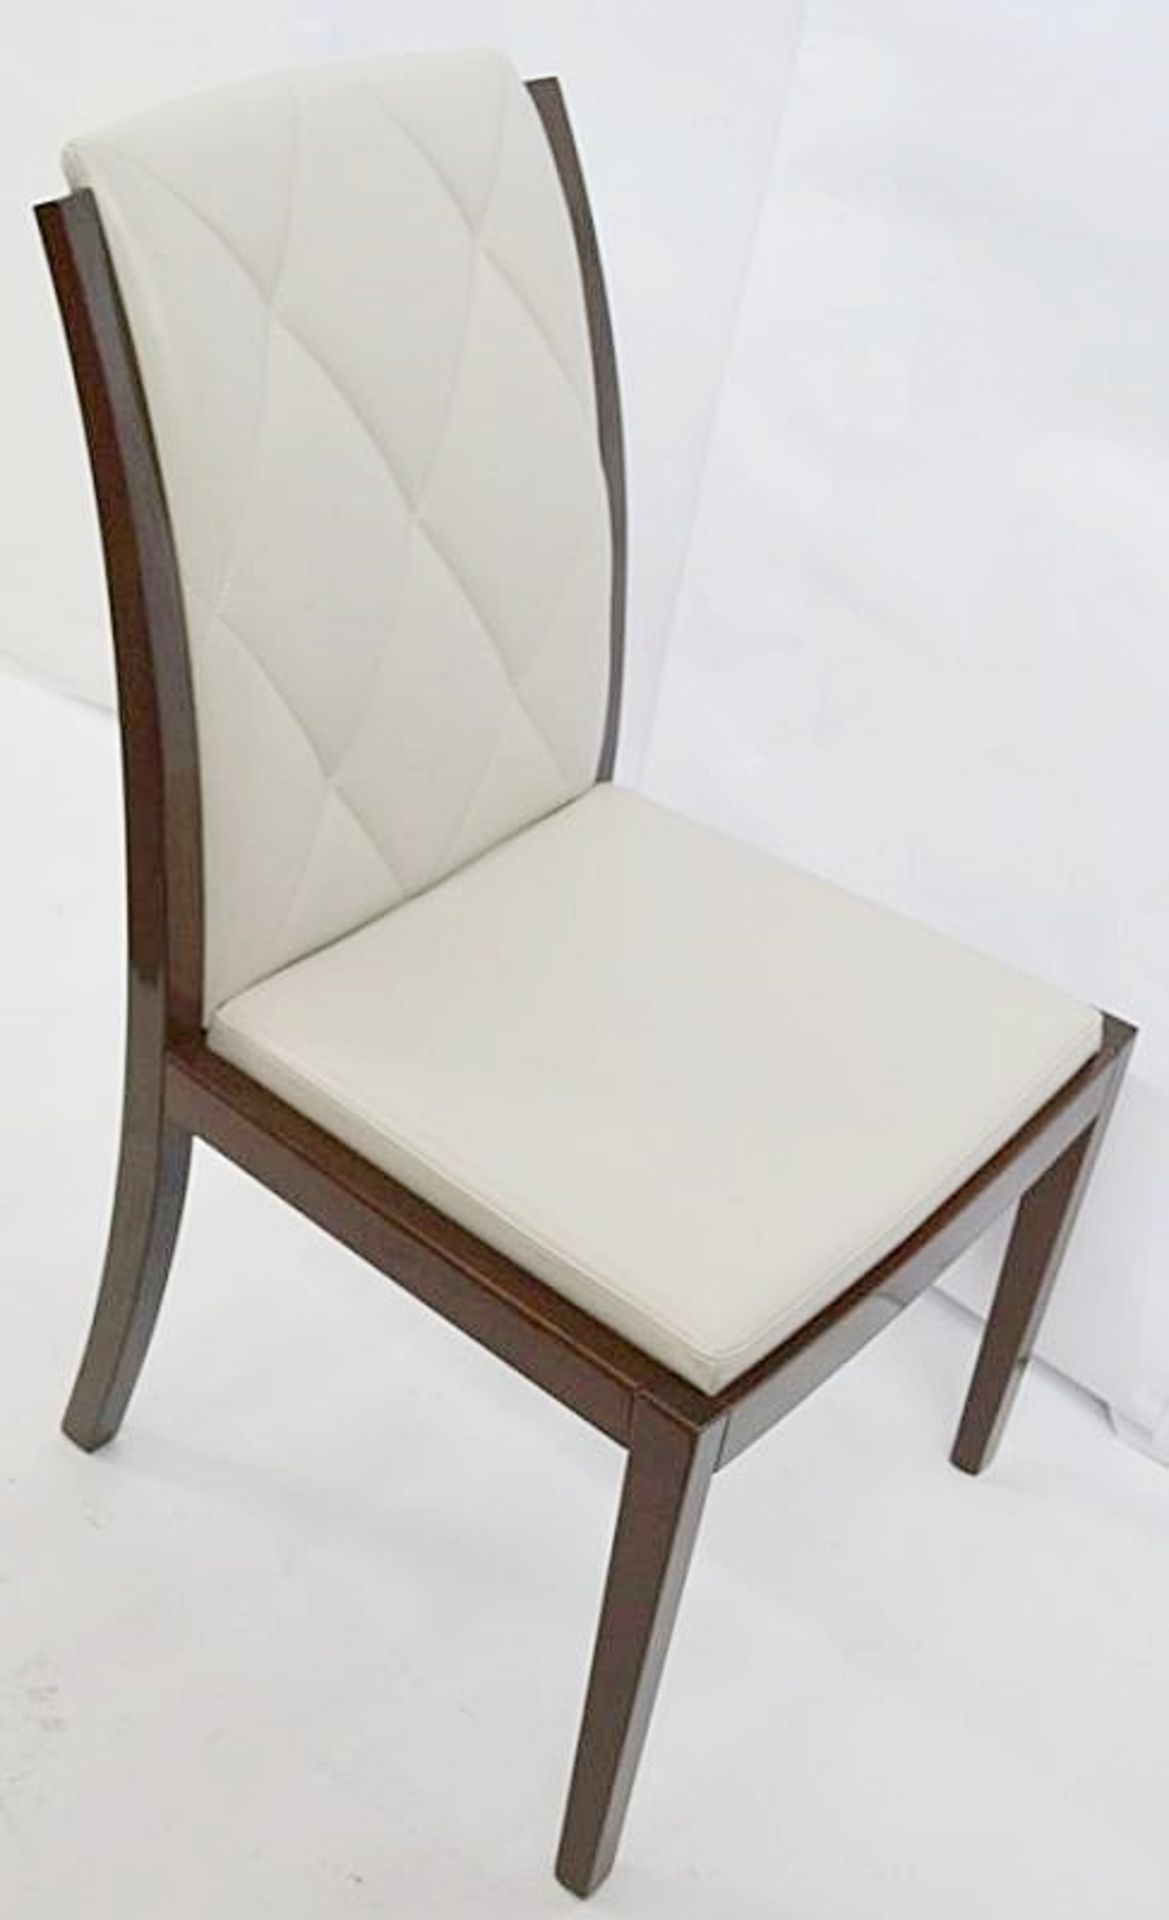 6 x KESTERPORT Dress Code Leather Side Chairs - W53cm x D59cm x H93cm, Seat Height: 50cm - Ref: - Image 5 of 9